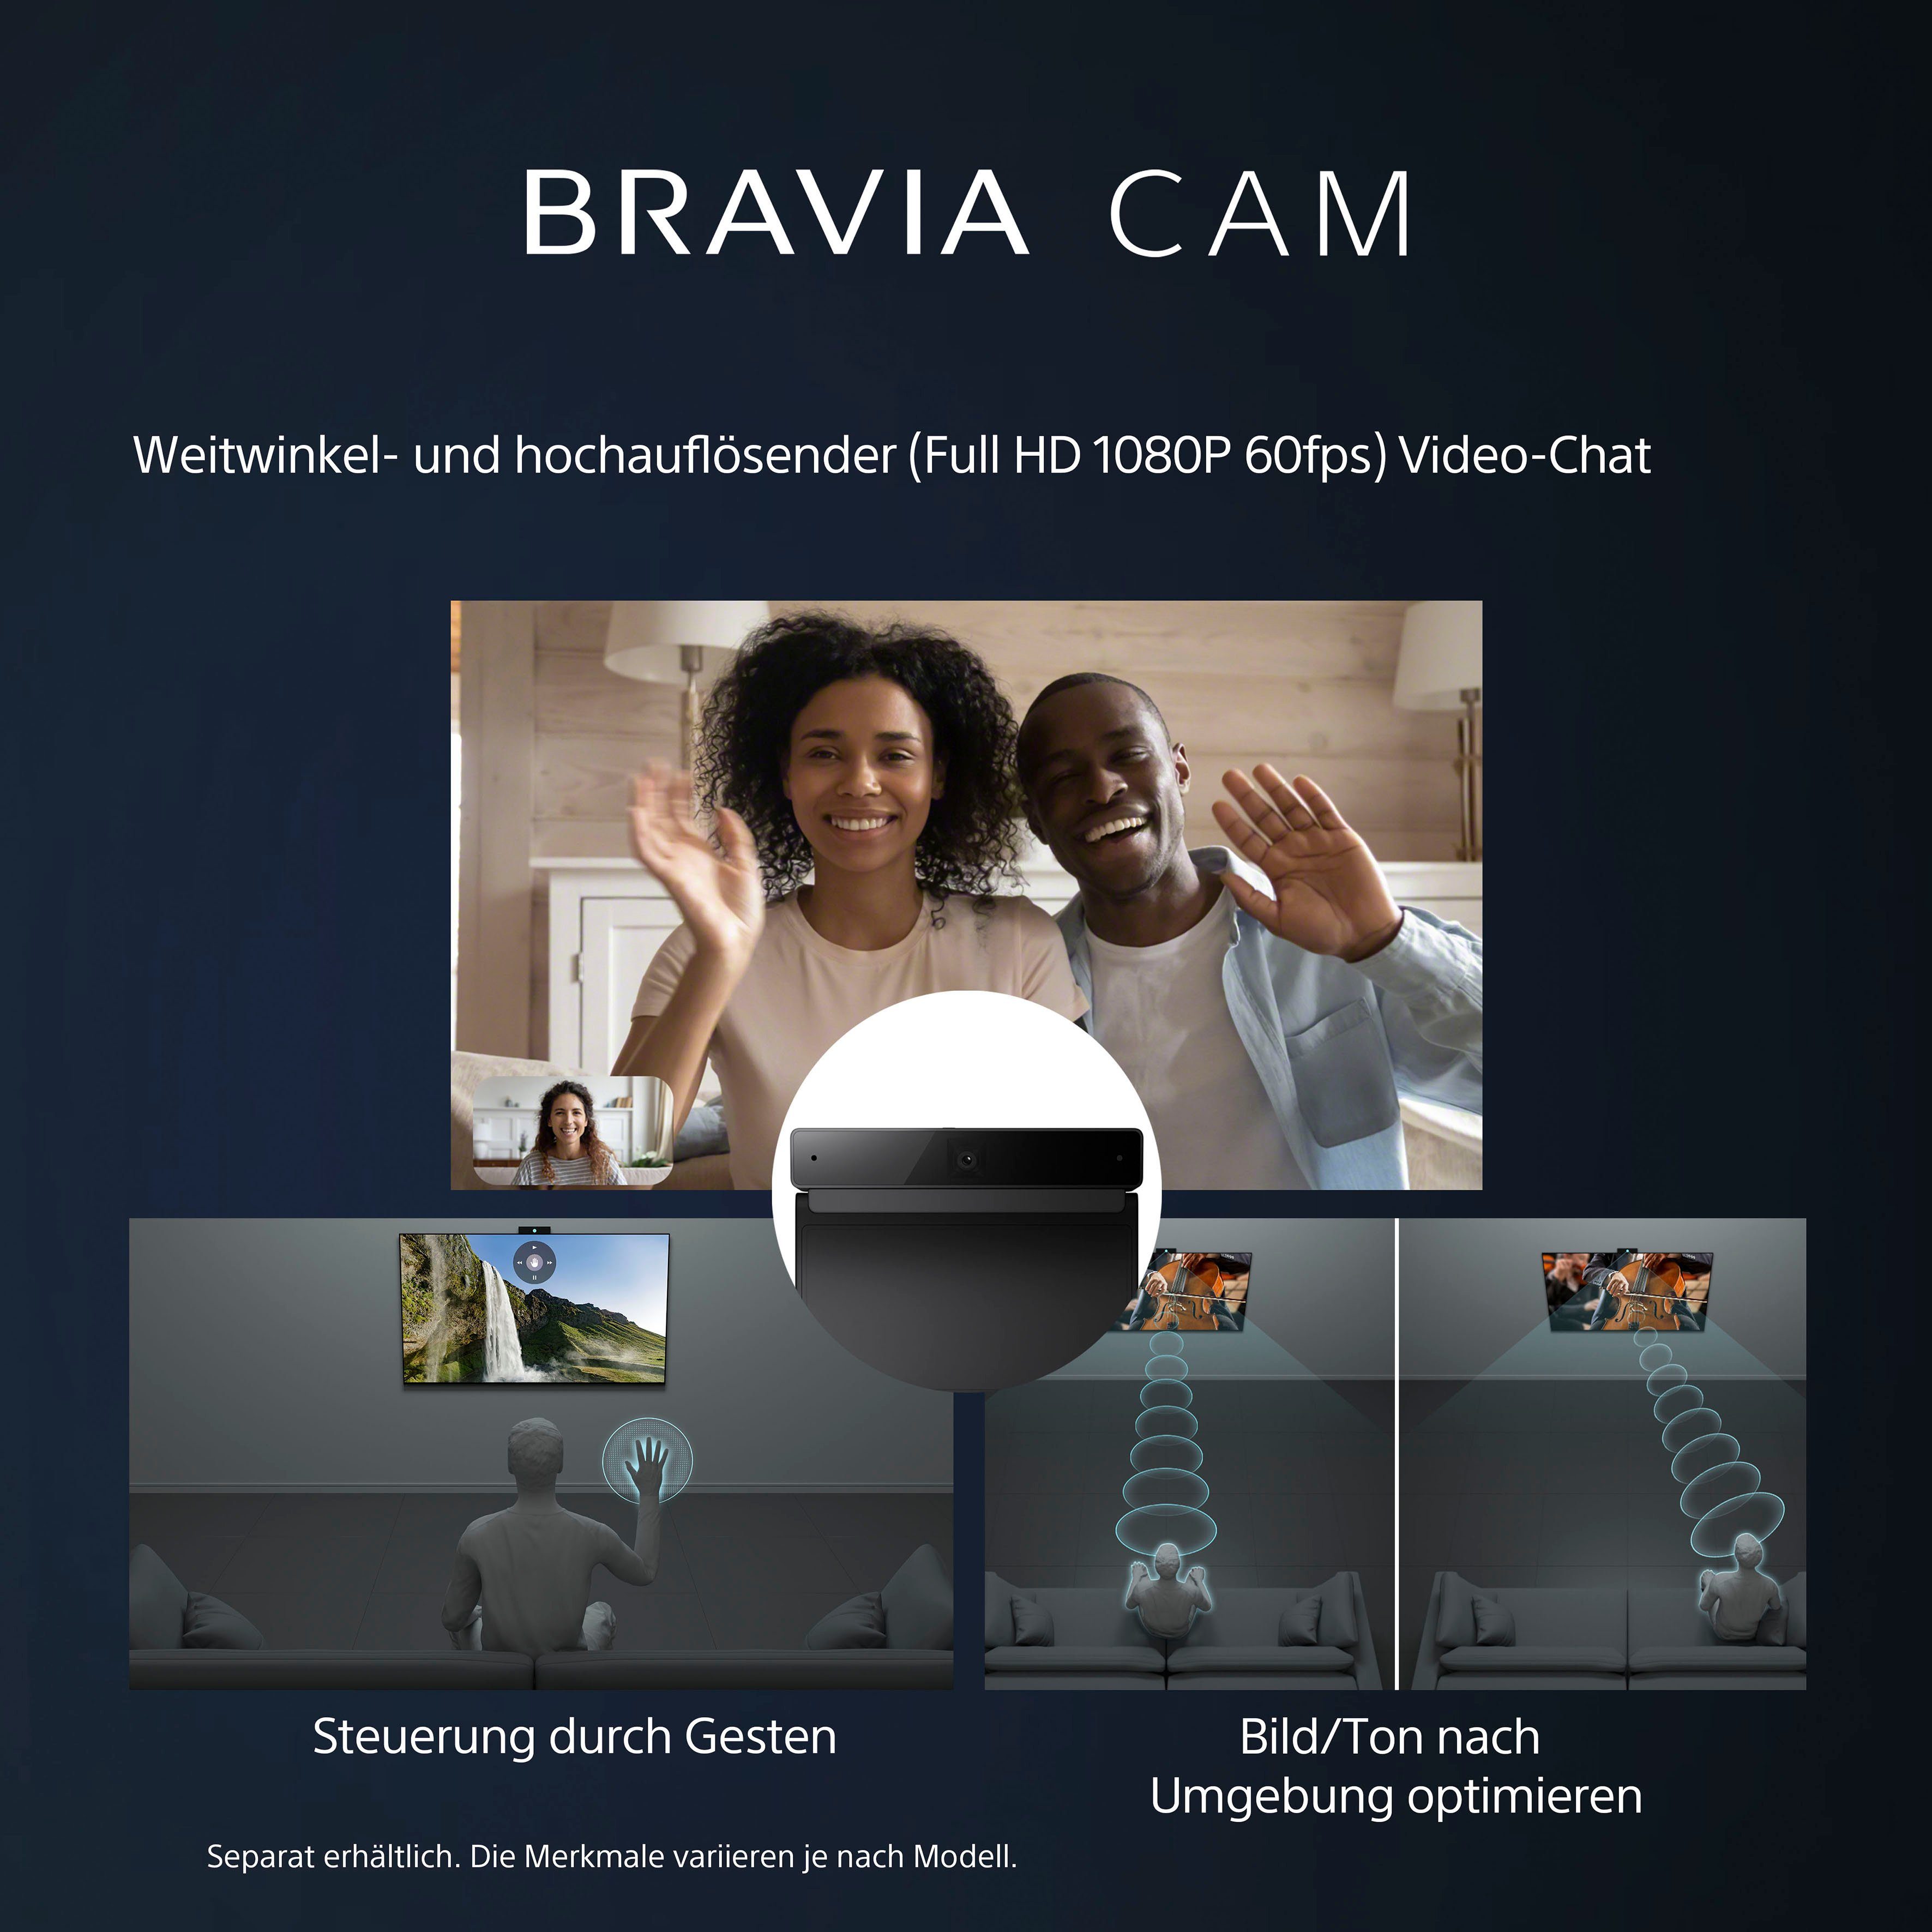 TRILUMINOS BRAVIA Google PS5-Features) Ultra PRO, XR-65A80L exklusiven Android TV, cm/65 4K Zoll, TV, CORE, Smart-TV, mit OLED-Fernseher HD, Sony Smart-TV, (164